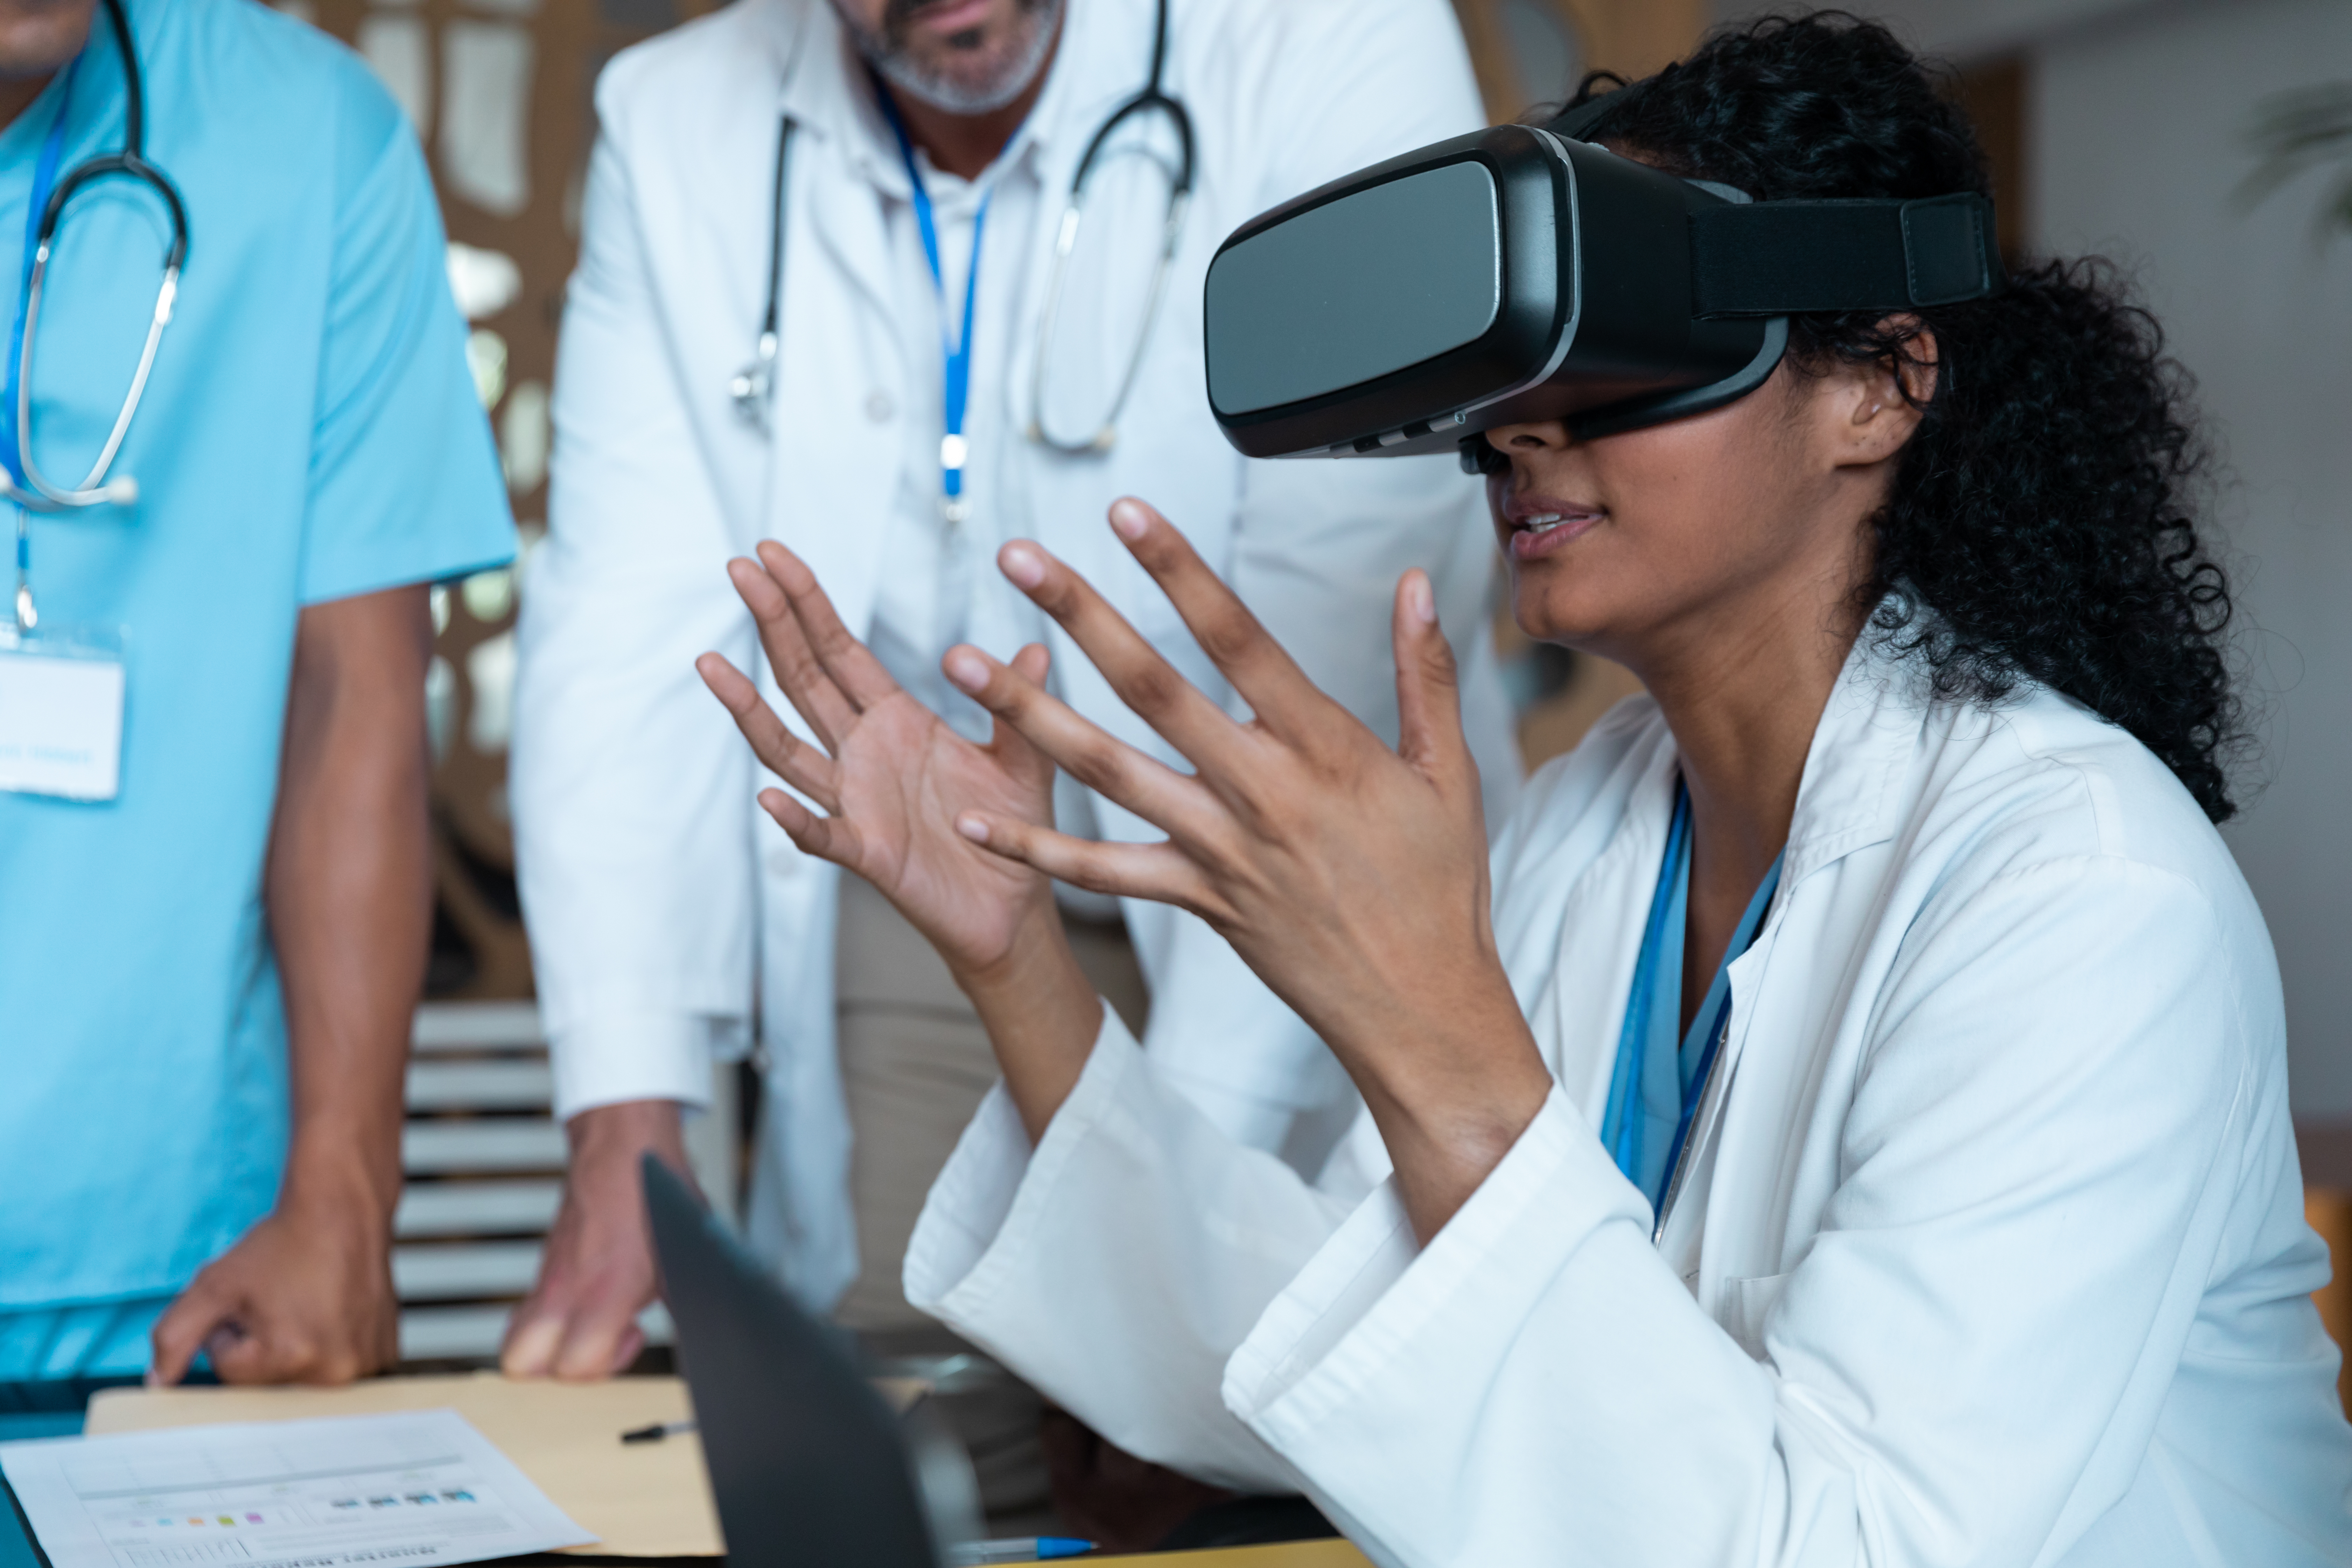 UConn Health is training orthopaedic surgery residents using VR solutions  from PrecisionOS? and Oculus - PrecisionOS